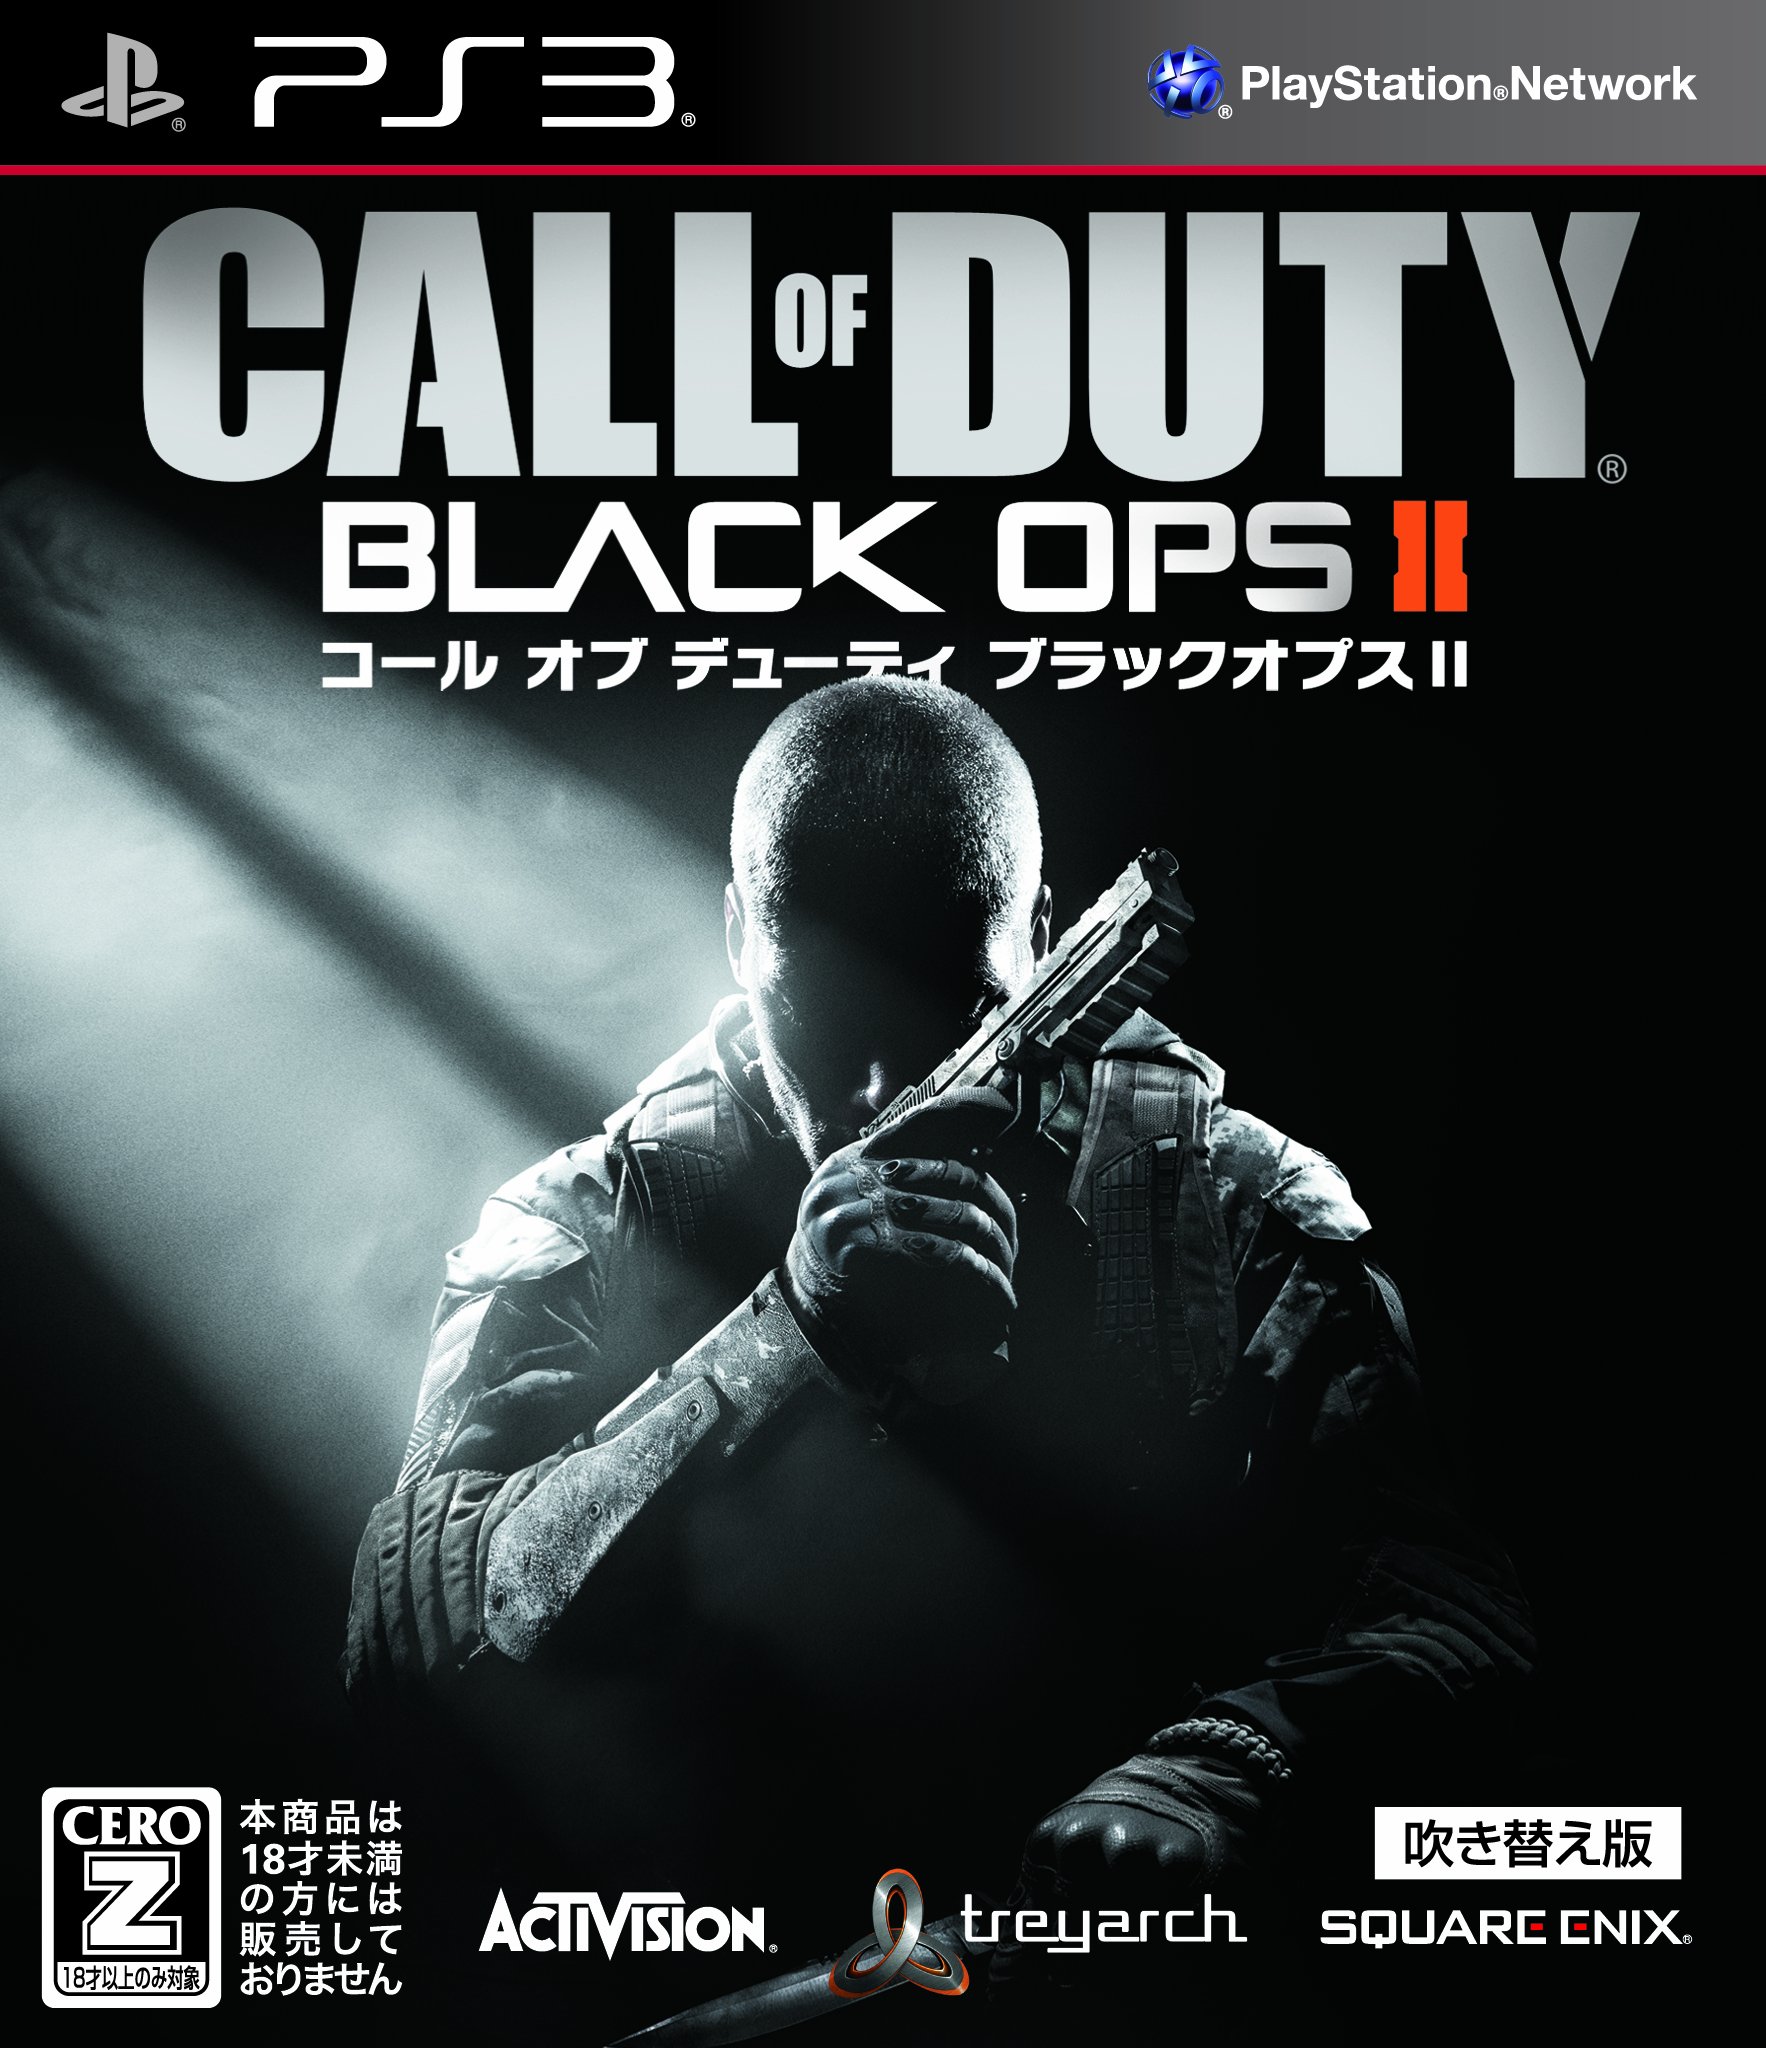 Call of Duty: Black Ops II [Dubbed Edition] [Japan Import]